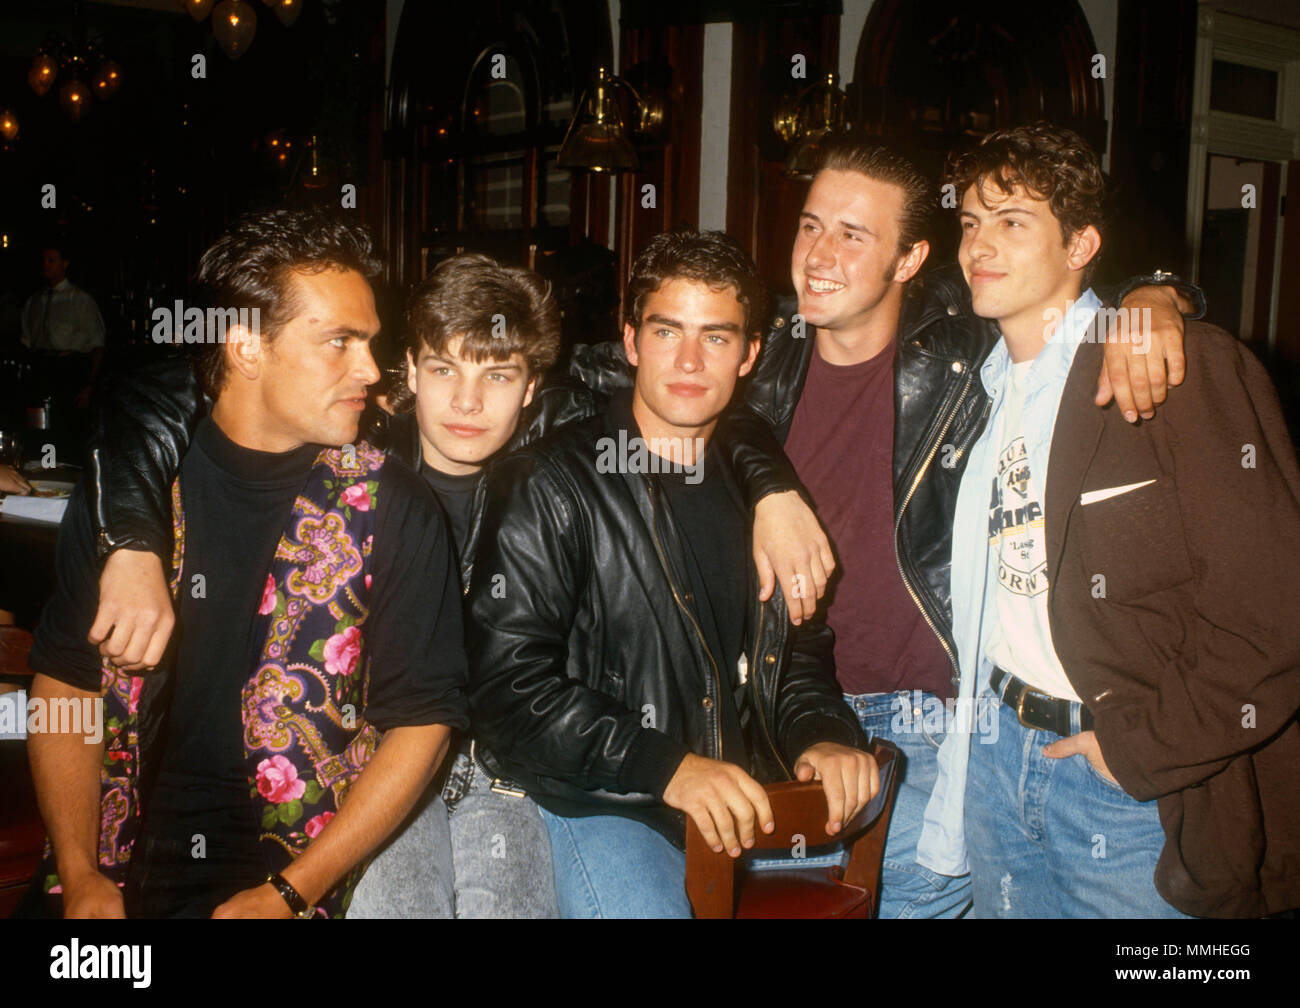 SHERMAN OAKS, CA - MAY 19: Actors Robert Rusler, Jay R. Ferguson, Rodney Harvey, David Arquette and Harold Pruett attend event for 'The Outsiders' television series at Sherman Oaks Galleria on May 19, 1990 in Sherman Oaks, California. Photo by Barry King/Alamy Stock Photo Stock Photo